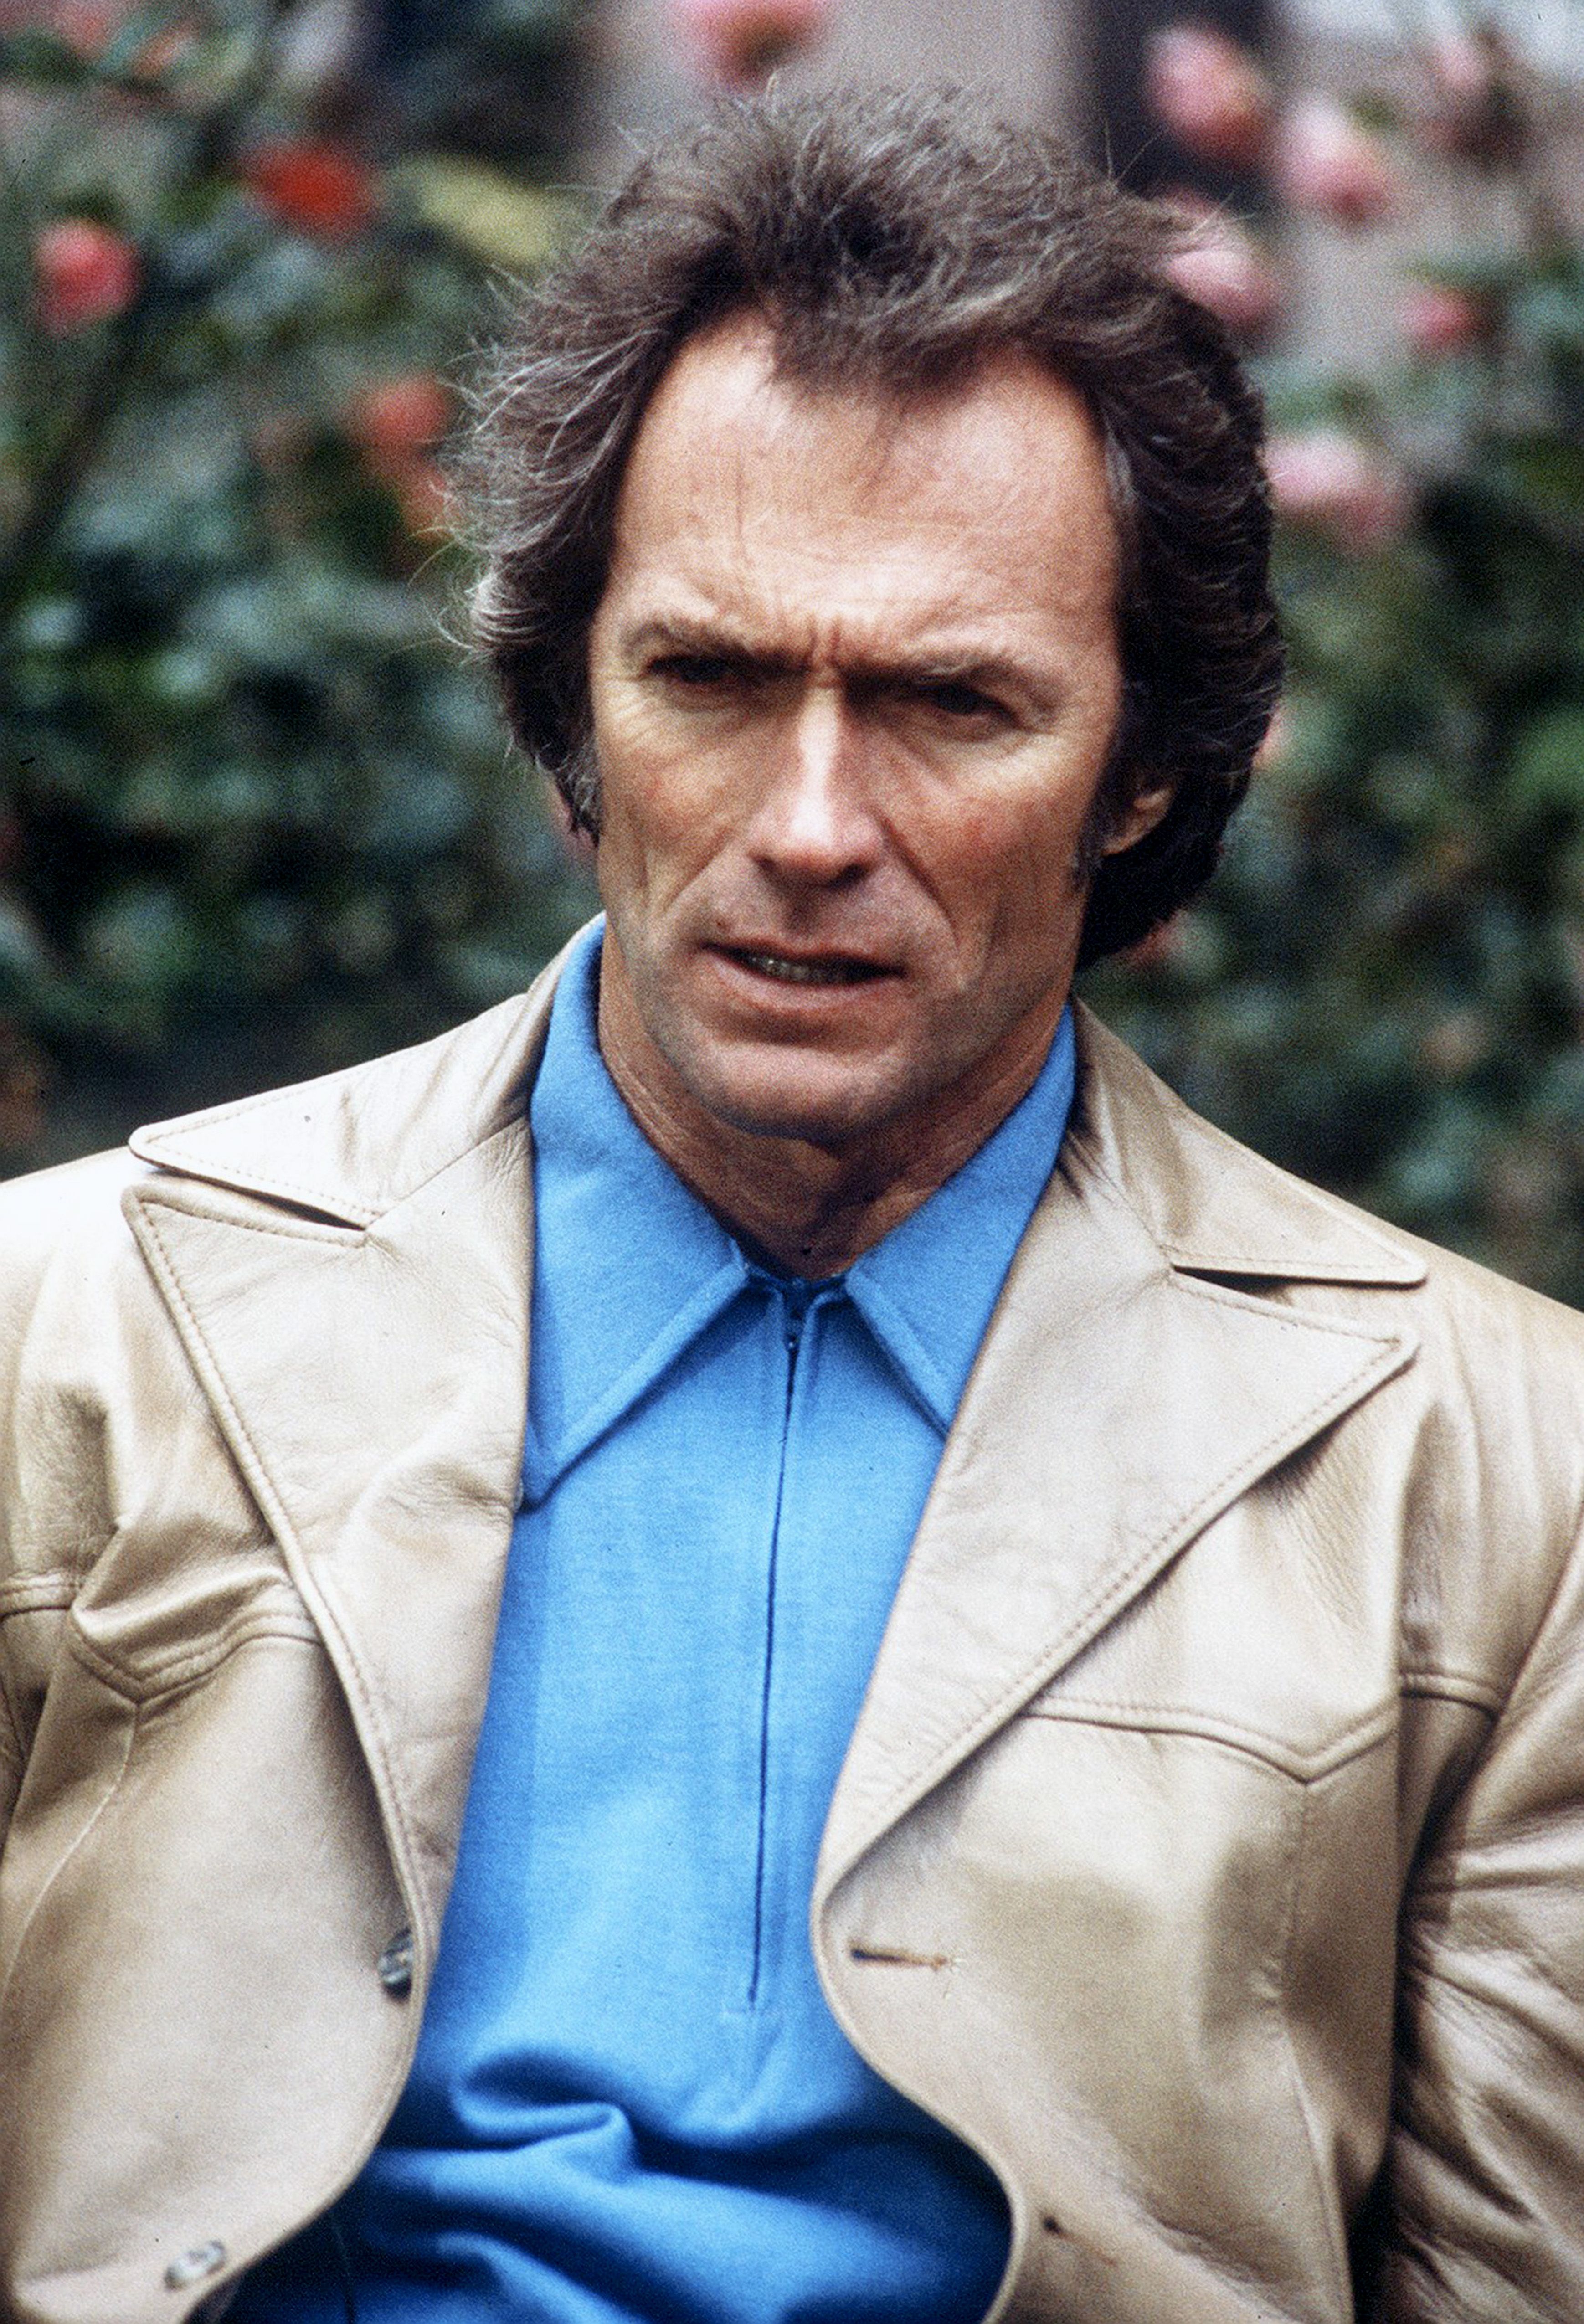 A photo of American actor Clint Eastwood, circa on January 01, 1978 | Photo: Getty Images